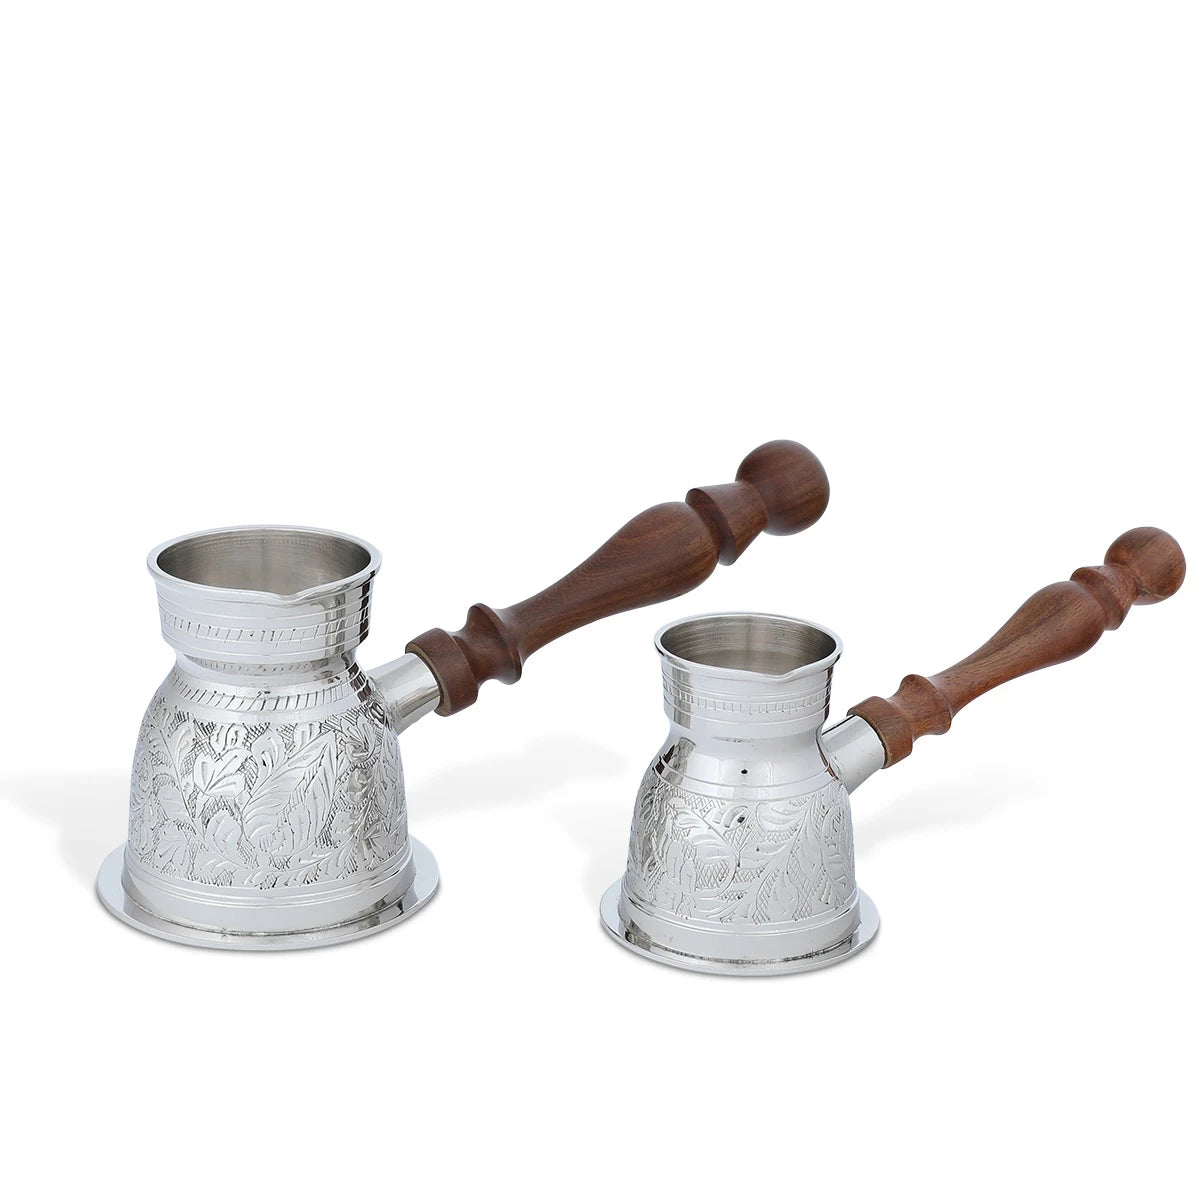 Front View of Turkish Coffee Pots - Silver